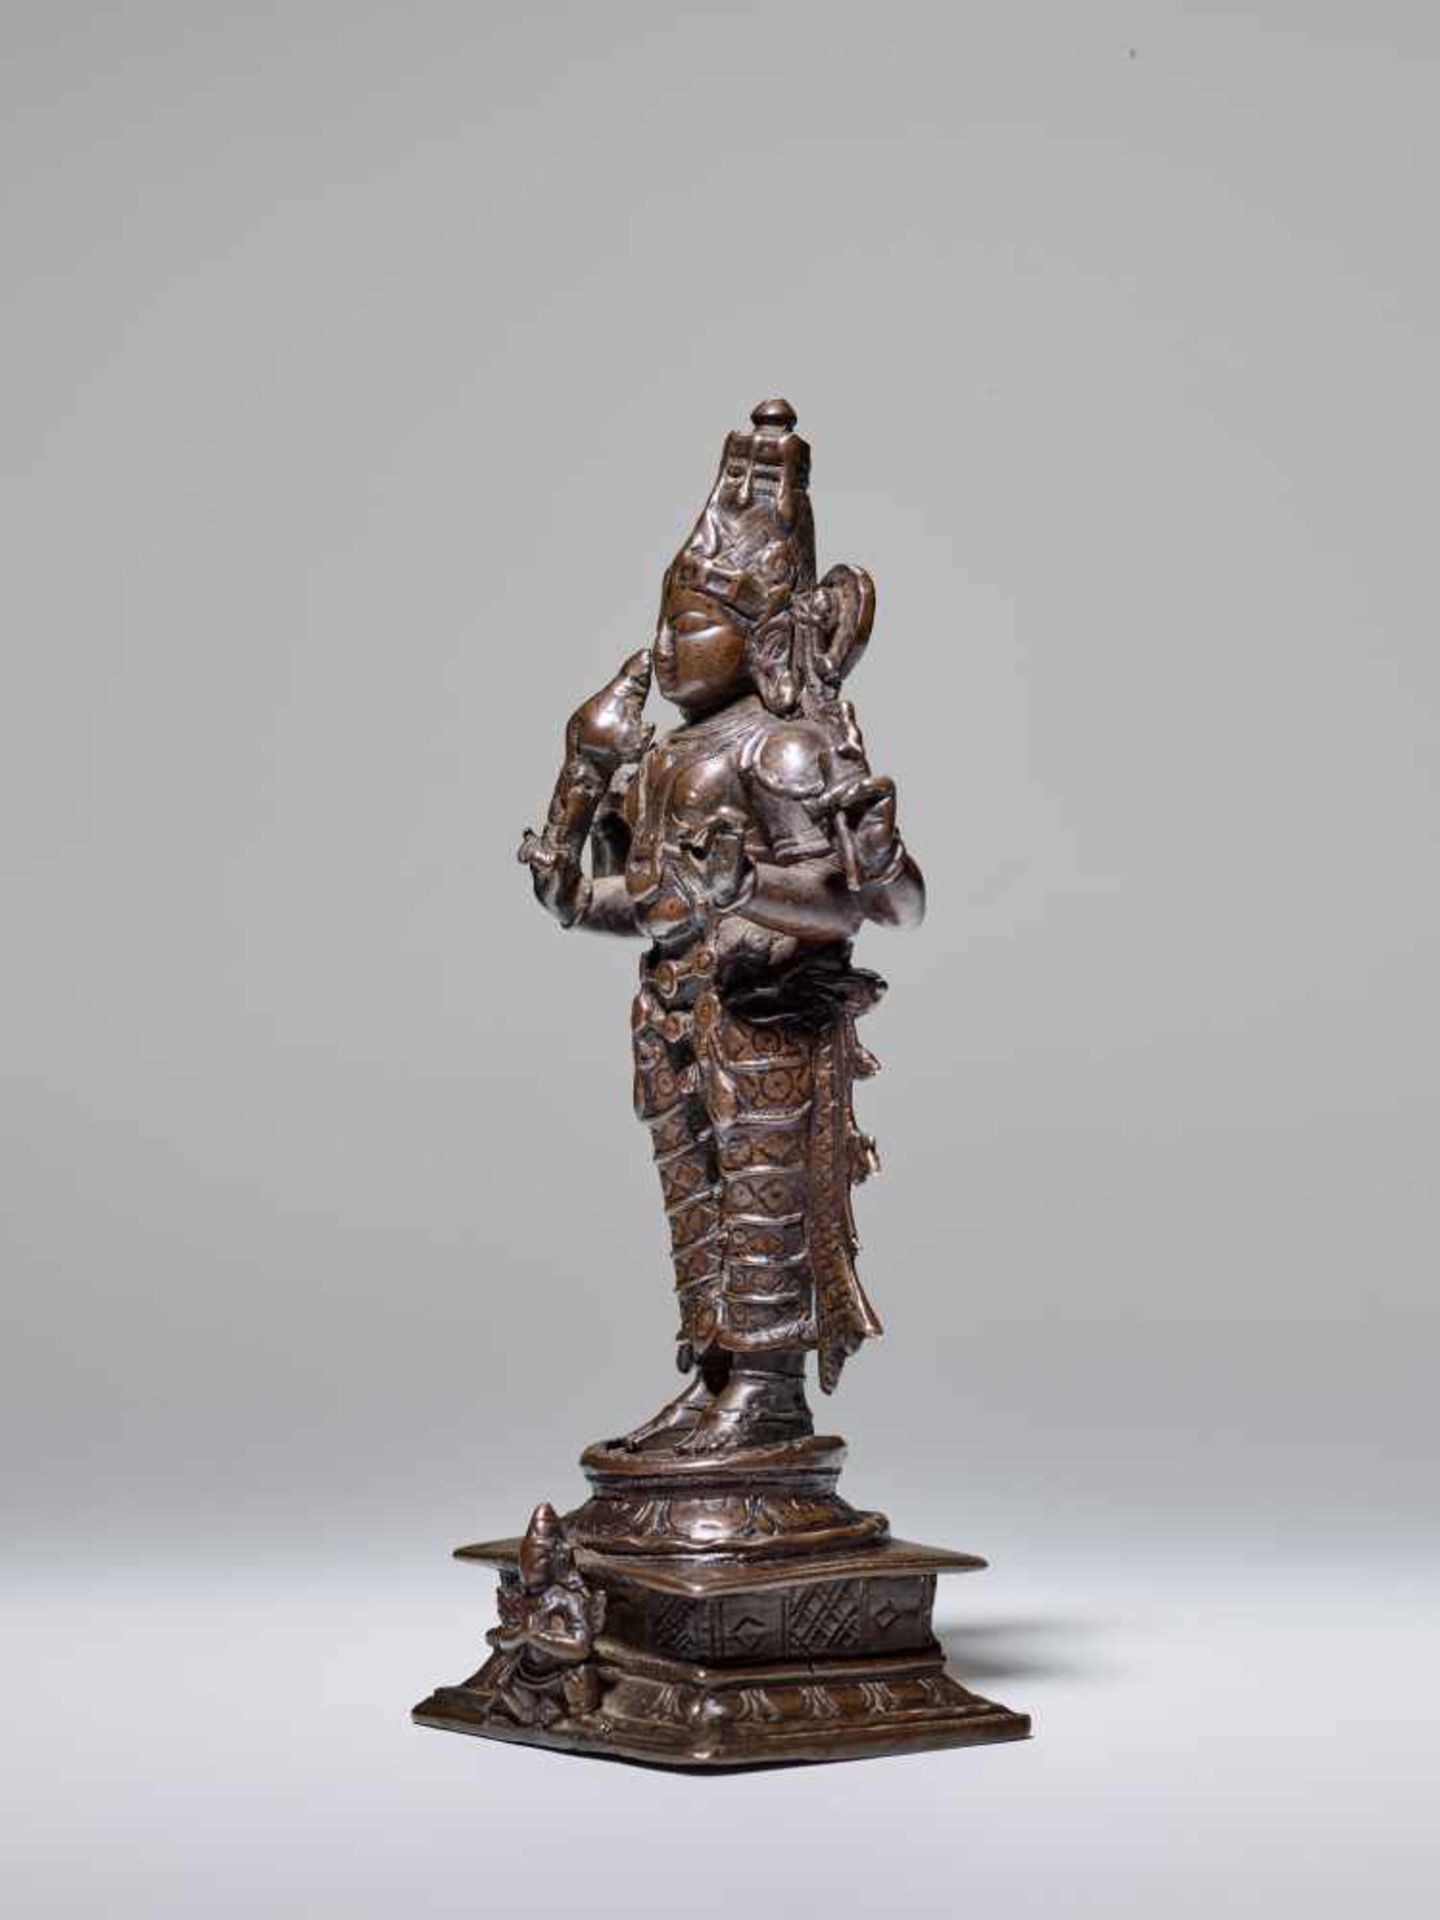 AN INDIAN COPPER BRONZE ALLOY FIGURE OF VISHNU, 18th – 19th CENTURY Cast and chased copper and - Image 5 of 7